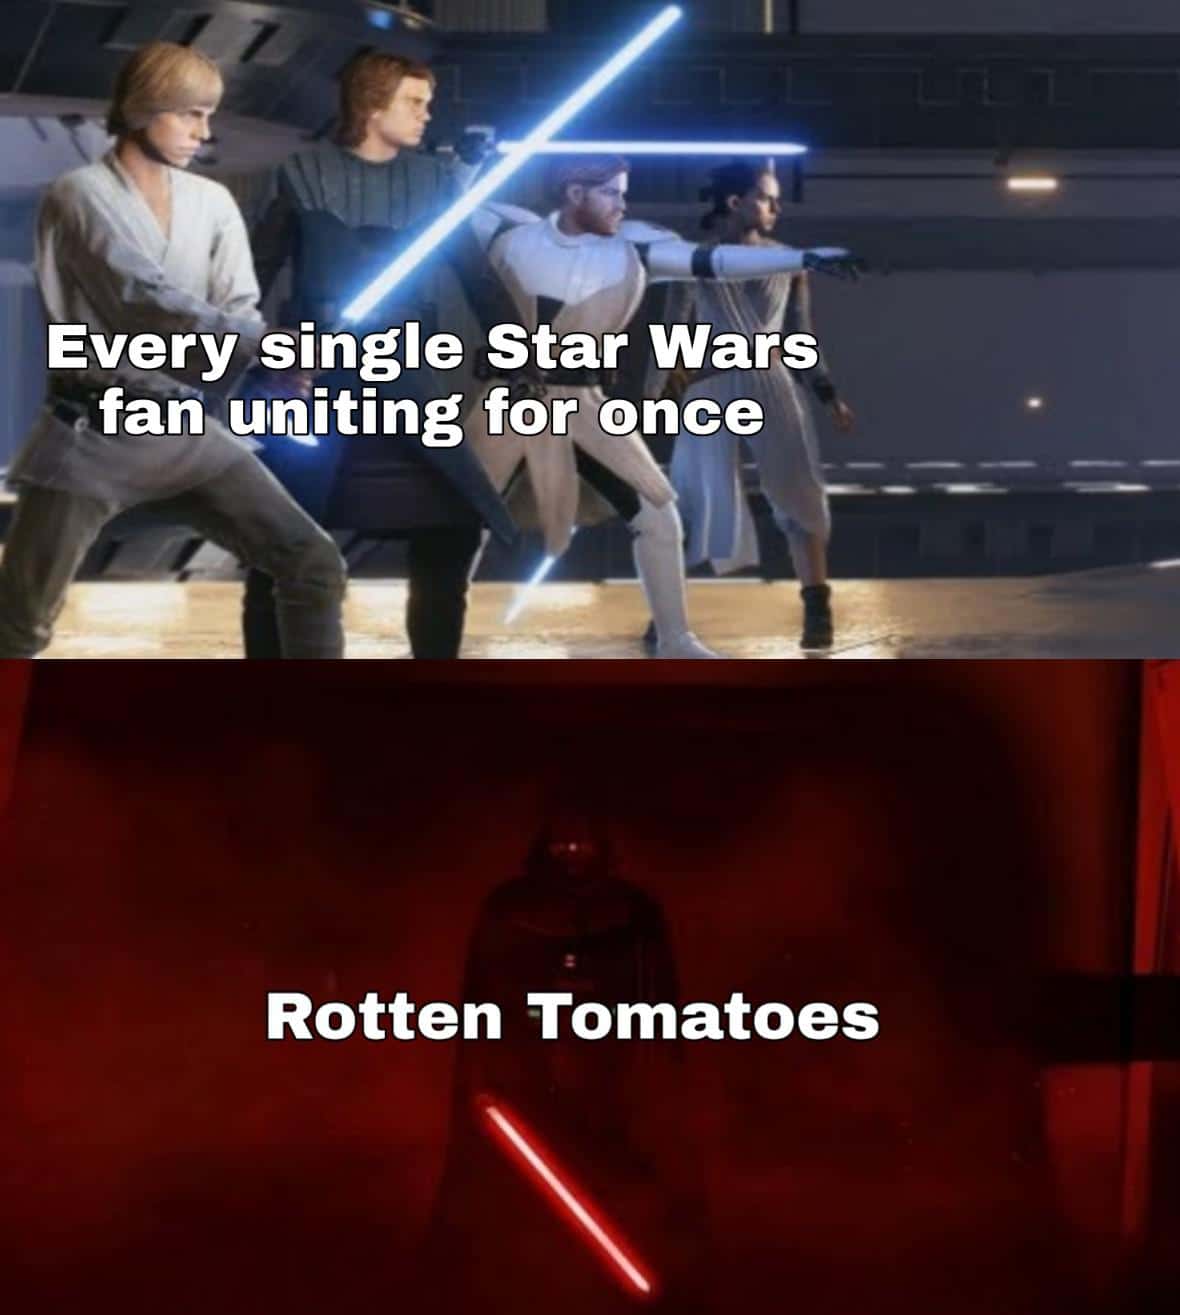 Sequel-memes, Anakin, Vader, Obi-Wan Star Wars Memes Sequel-memes, Anakin, Vader, Obi-Wan text: Every single Star Wars e fan uniting for once Rotten Tomatoes 